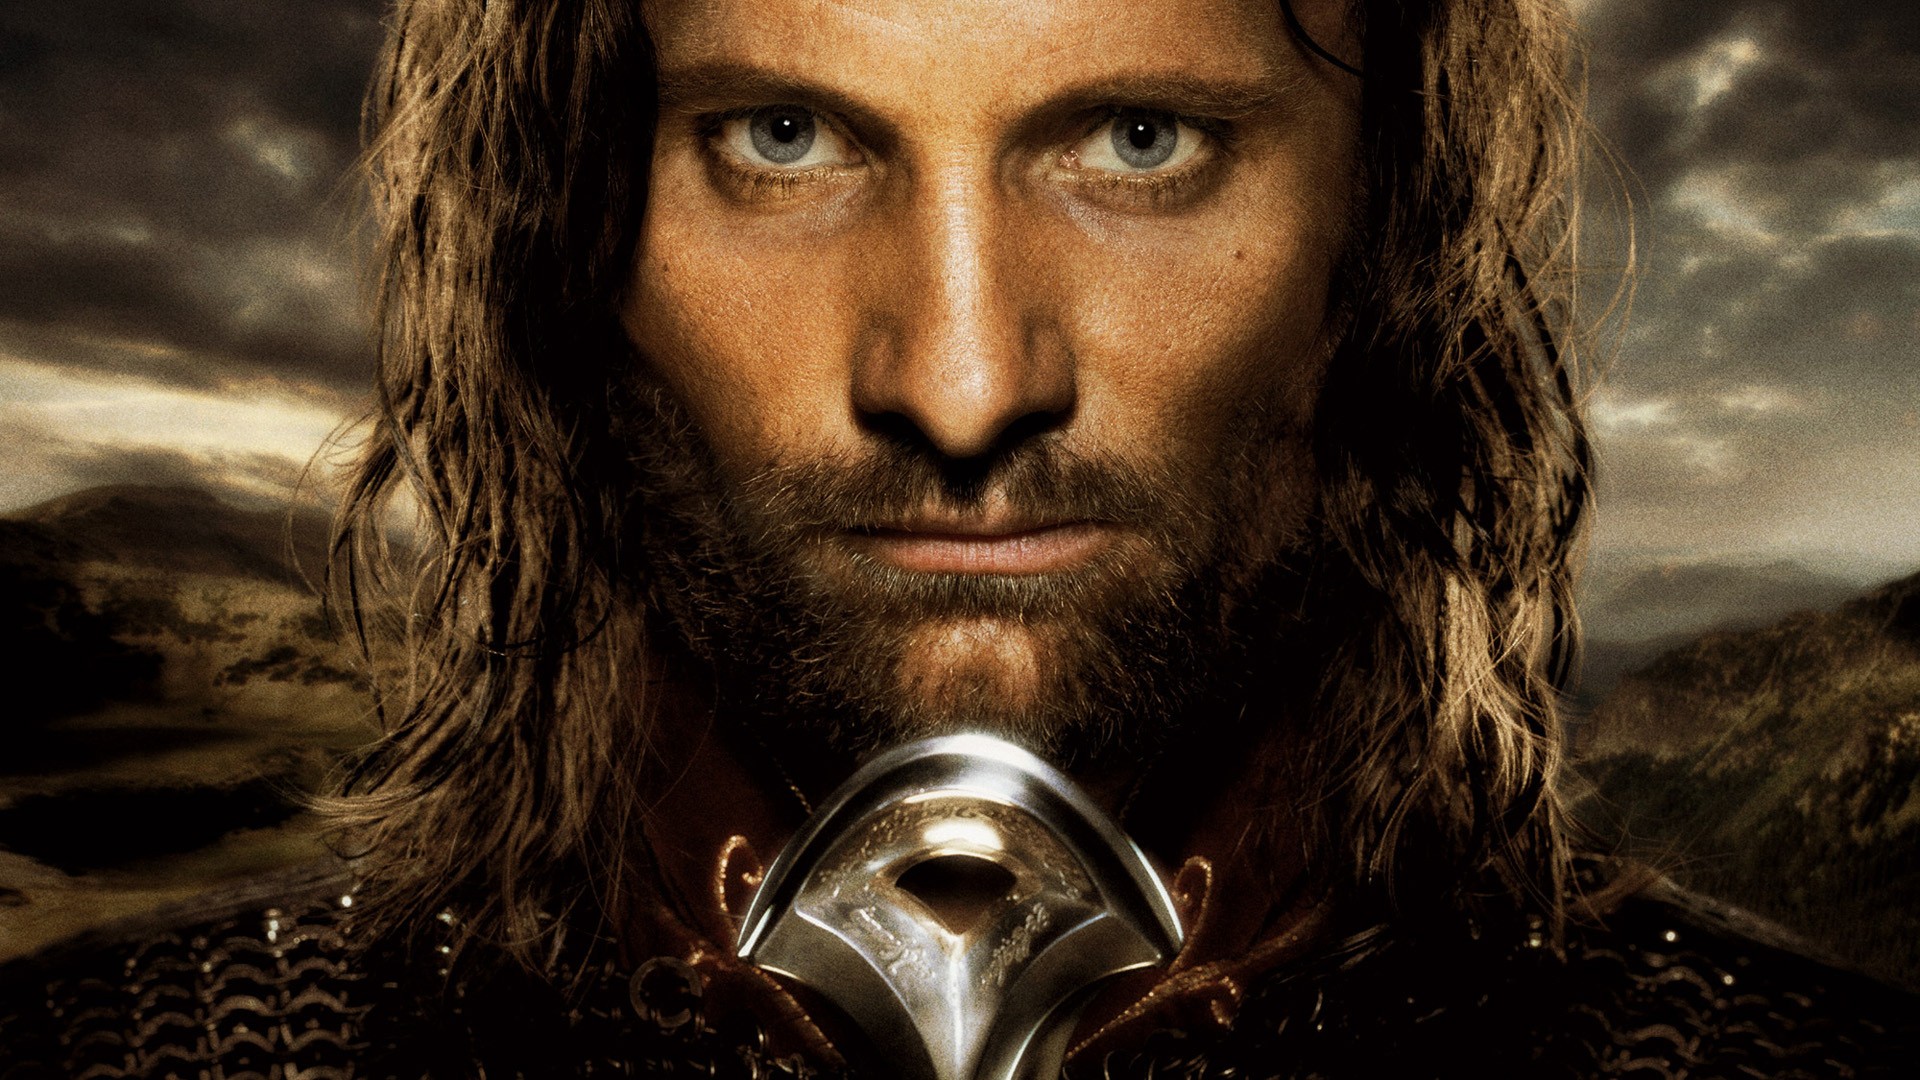 Movies The Lord Of The Rings The Lord Of The Rings The Return Of The King Aragorn The Lord Of The Ri 1920x1080